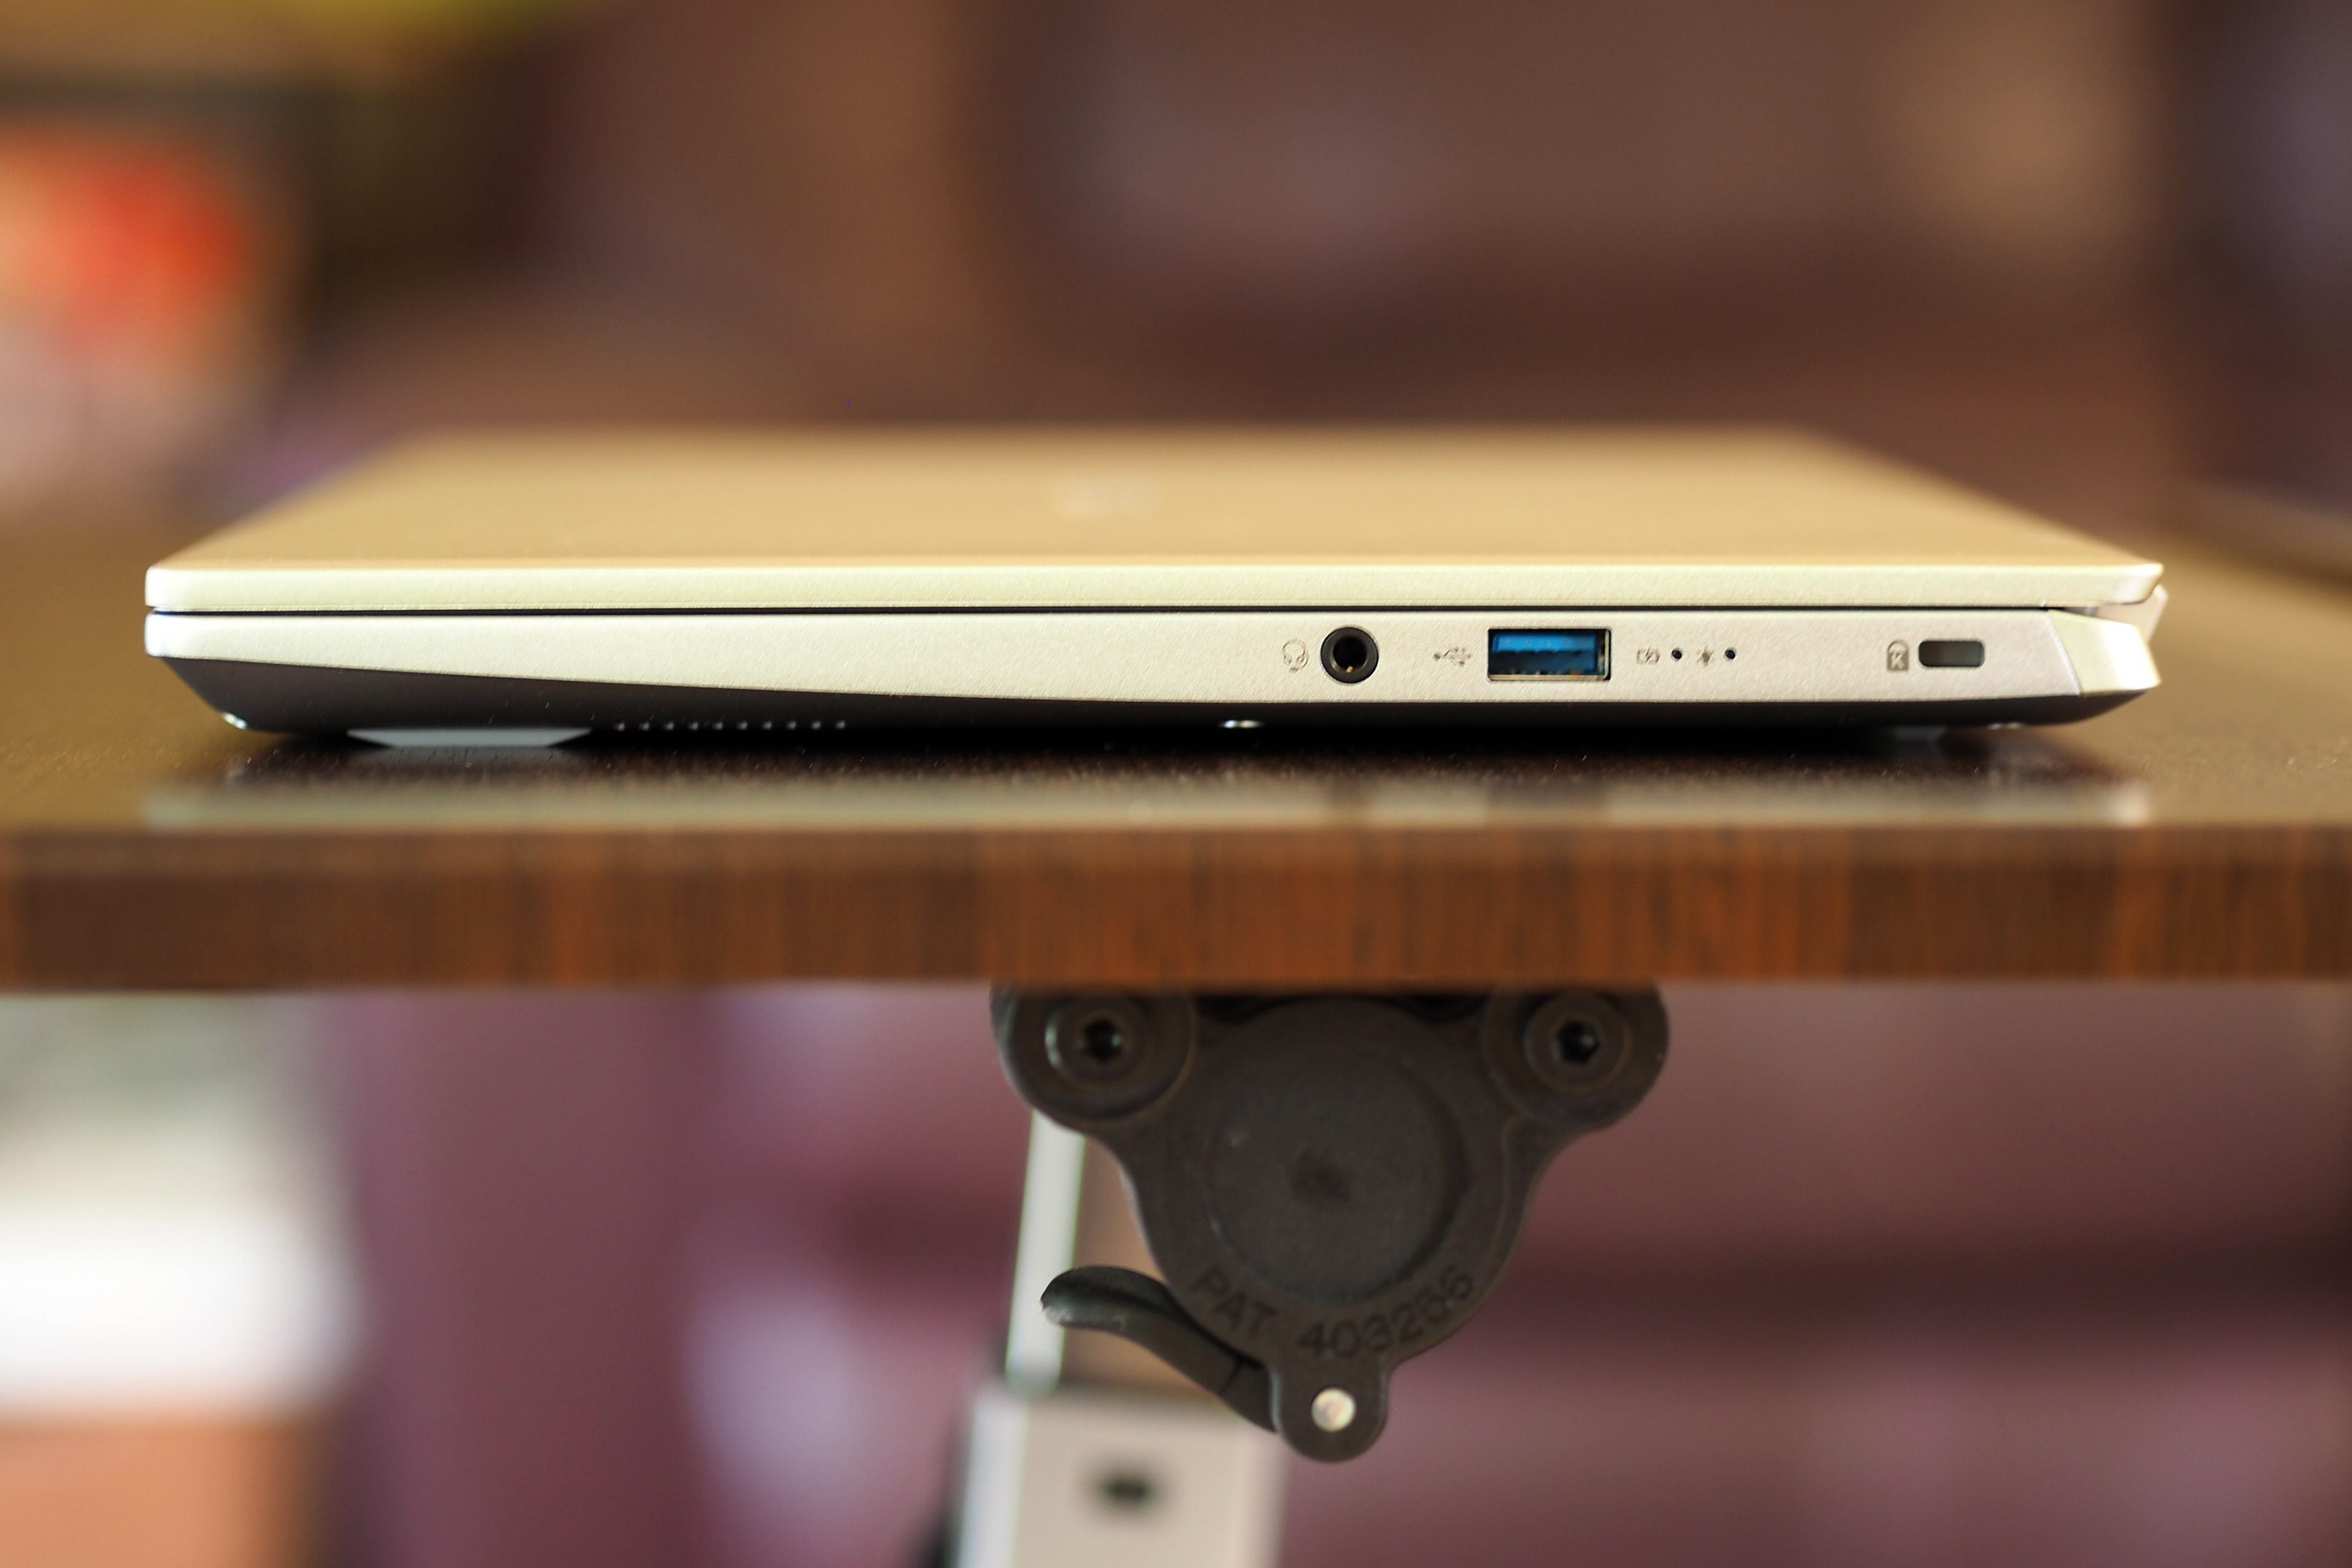 Acer Swift X right side ports and plugins. Headphone jack and USB port.